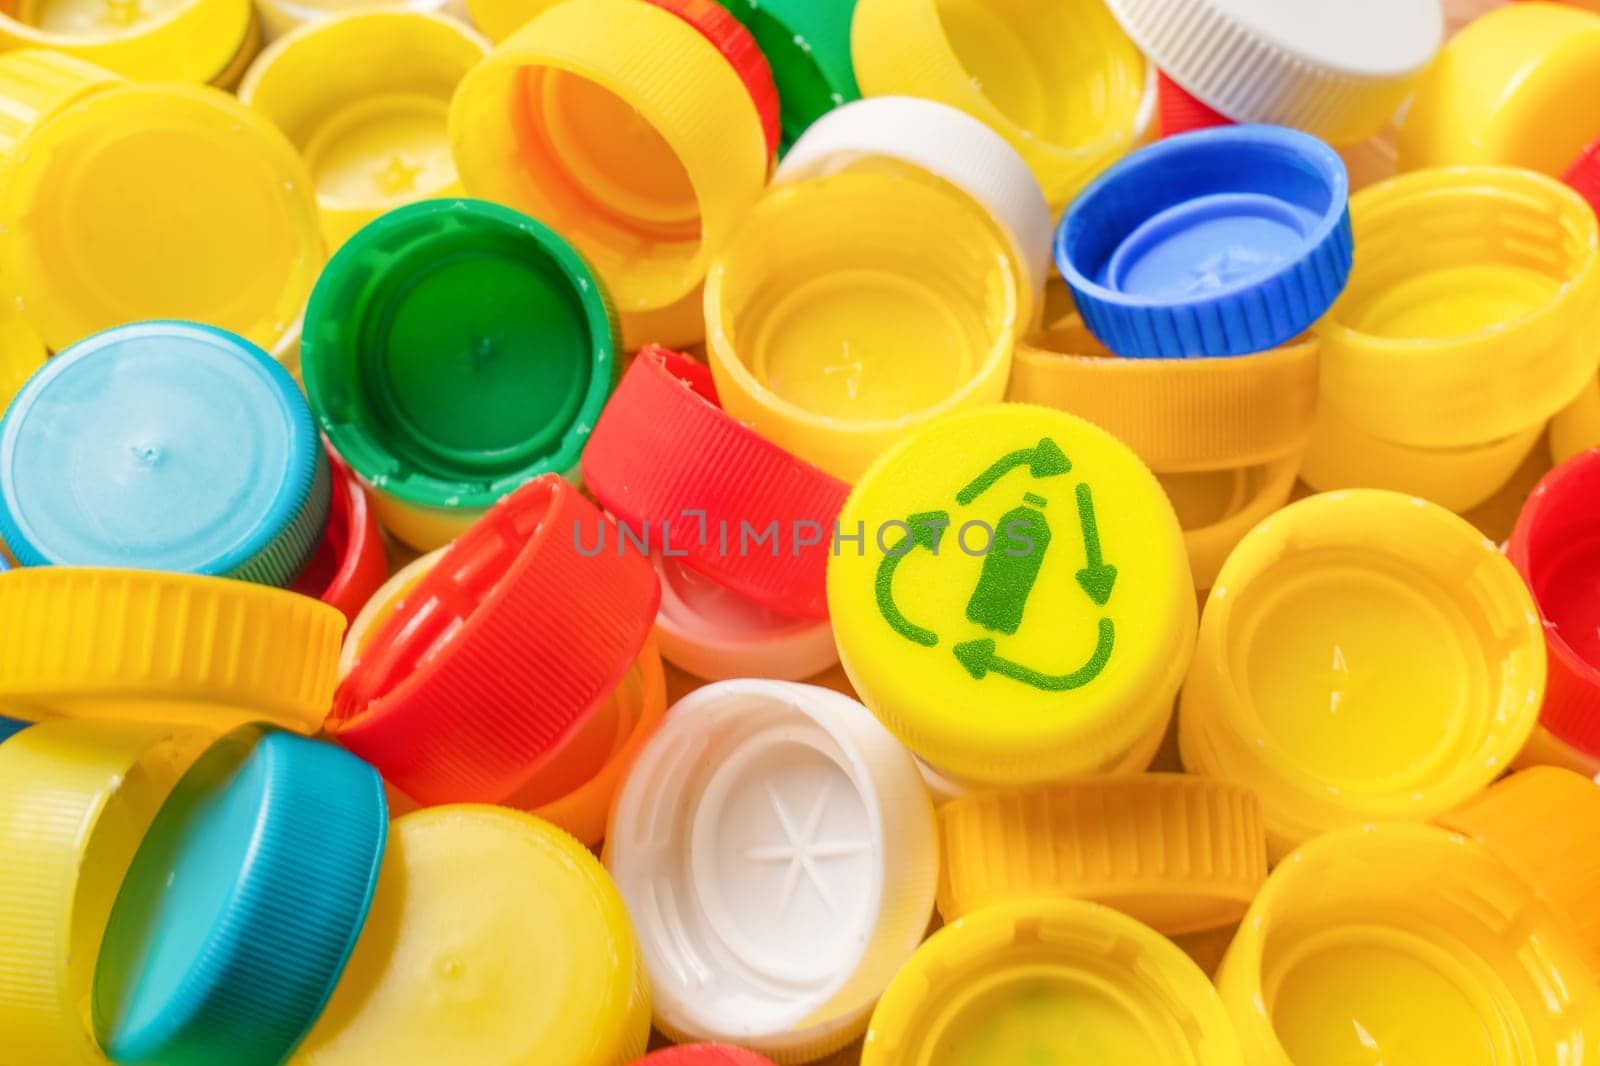 Garbage PET plastic waste sorting icon PET recycling concept. Pile of plastic bottle caps icon recycle symbol reuse icon bottle cap recycling plastic caps pile by synel